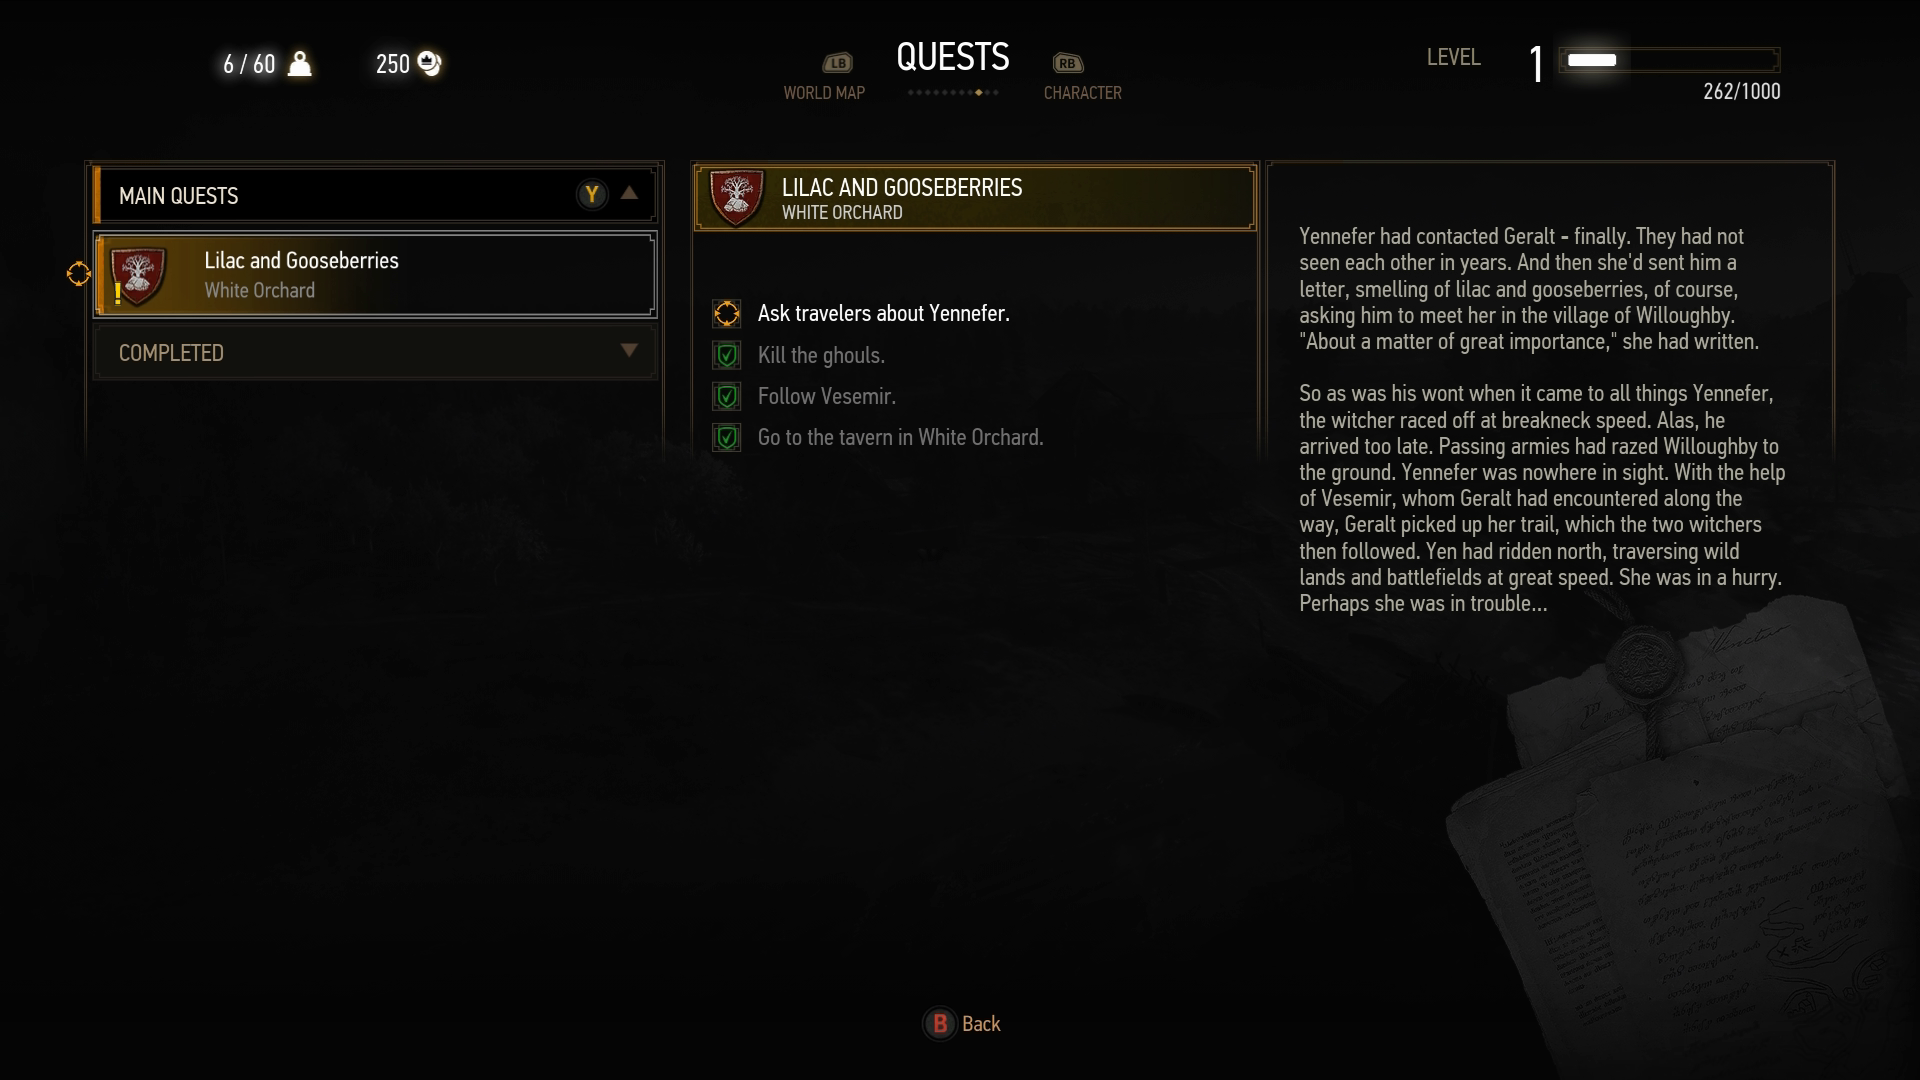 A screenshot of the Quests menu from The Witcher 3: Wild Hunt. The main quest, called "lilac and gooseberries," has focus.